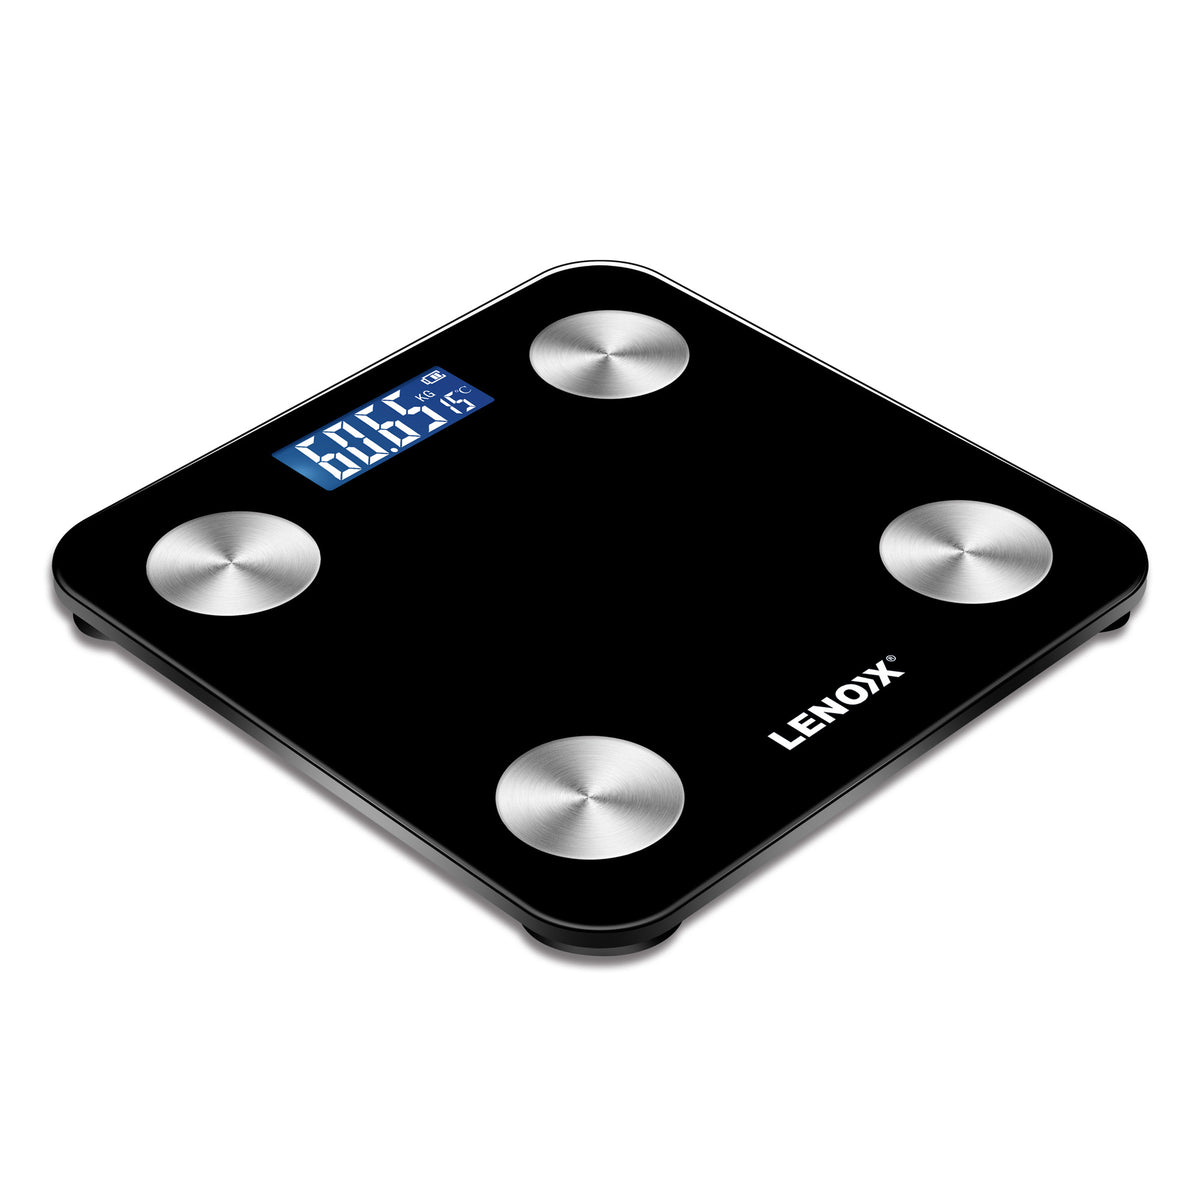 Angle view of the Lenoxx Smart Body Scale.